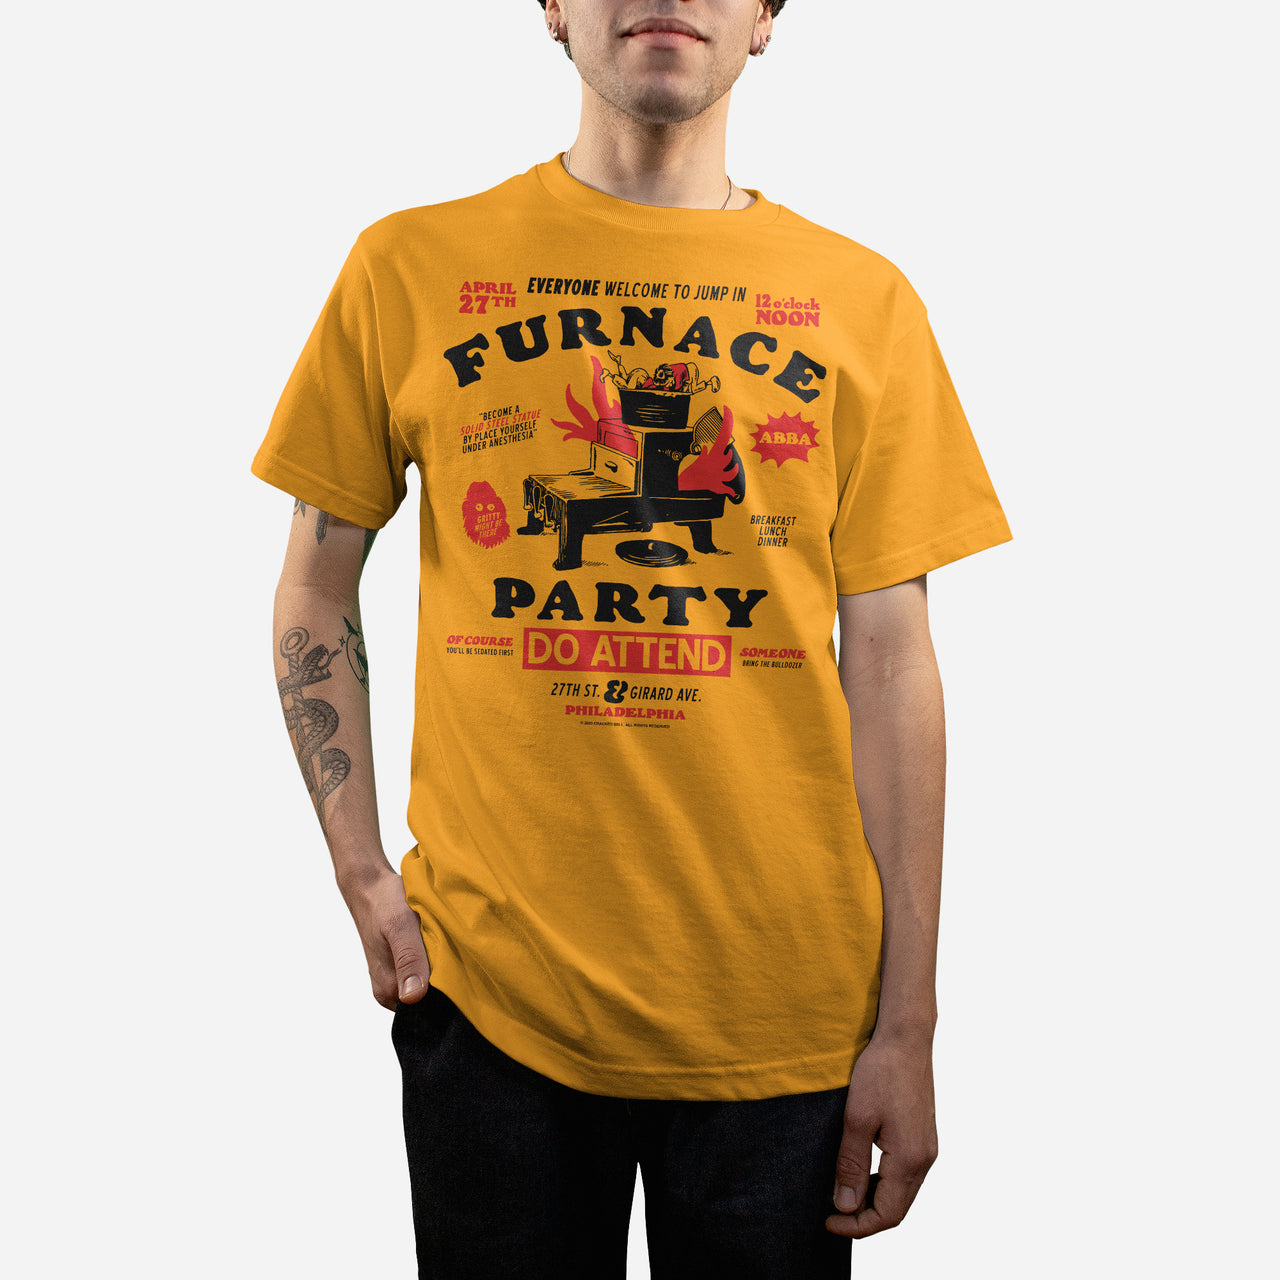 "Furnace Party" Gold Shirt